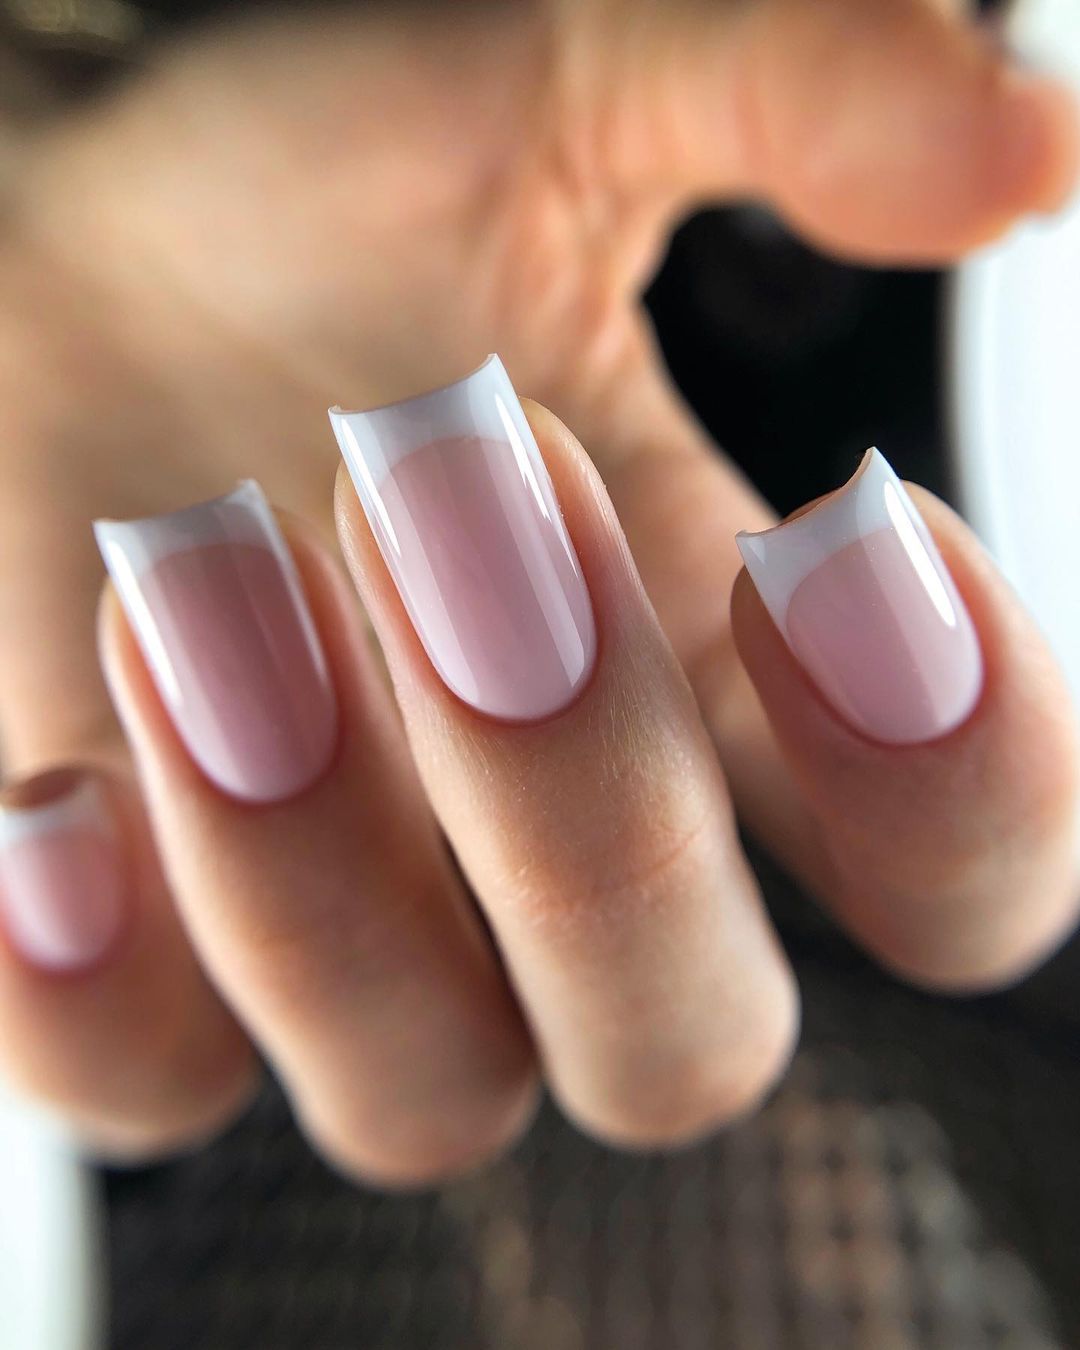 Bridesmaid nails french manicure